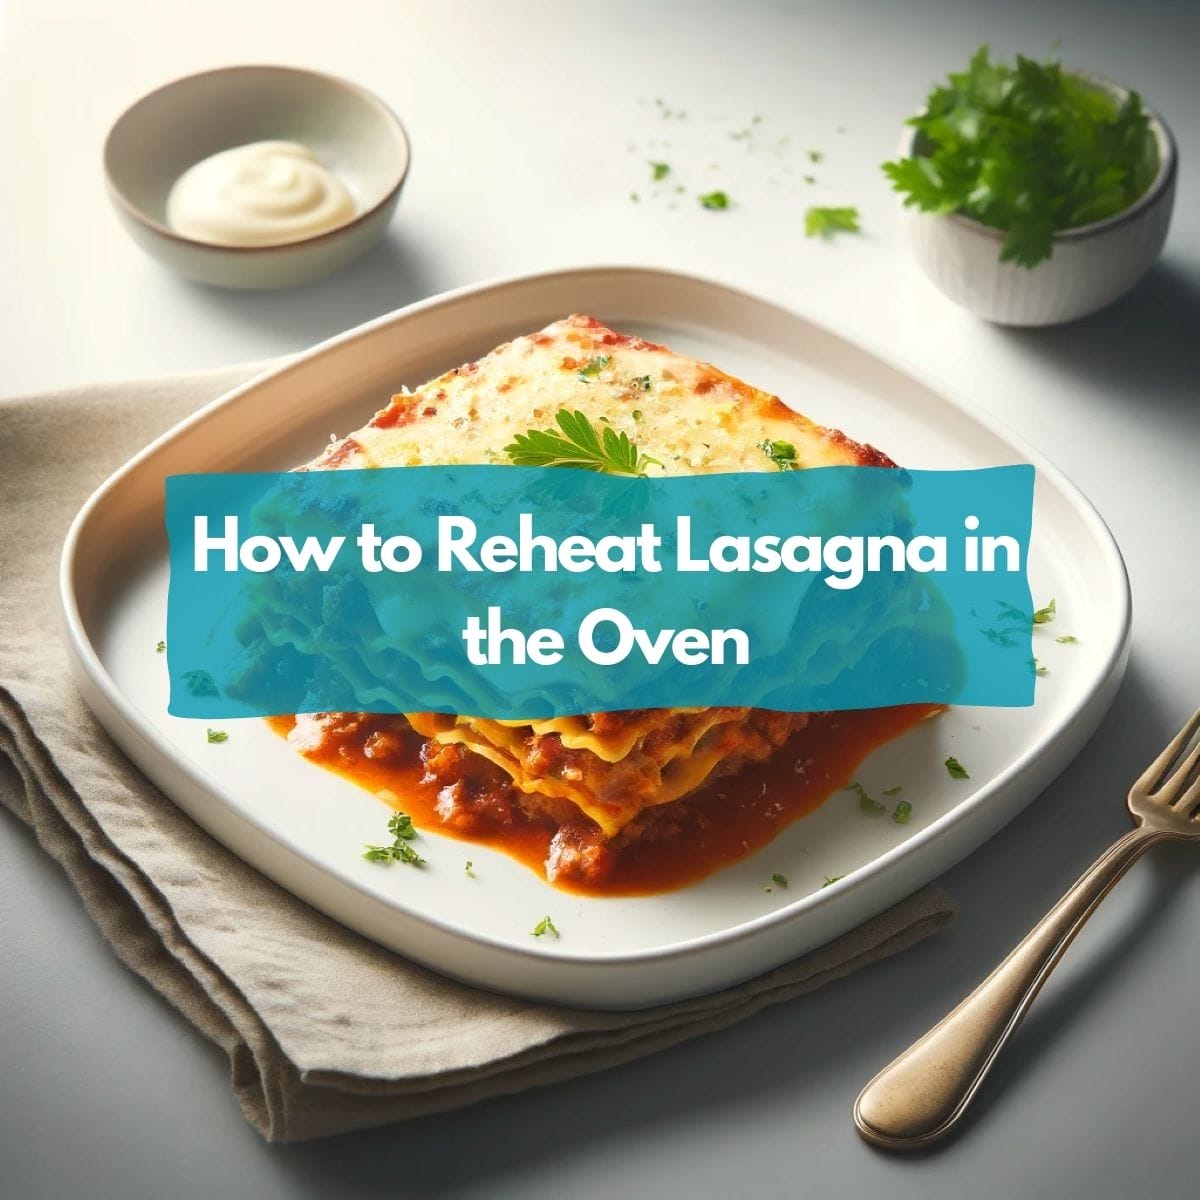 Reheat lasagna in the oven